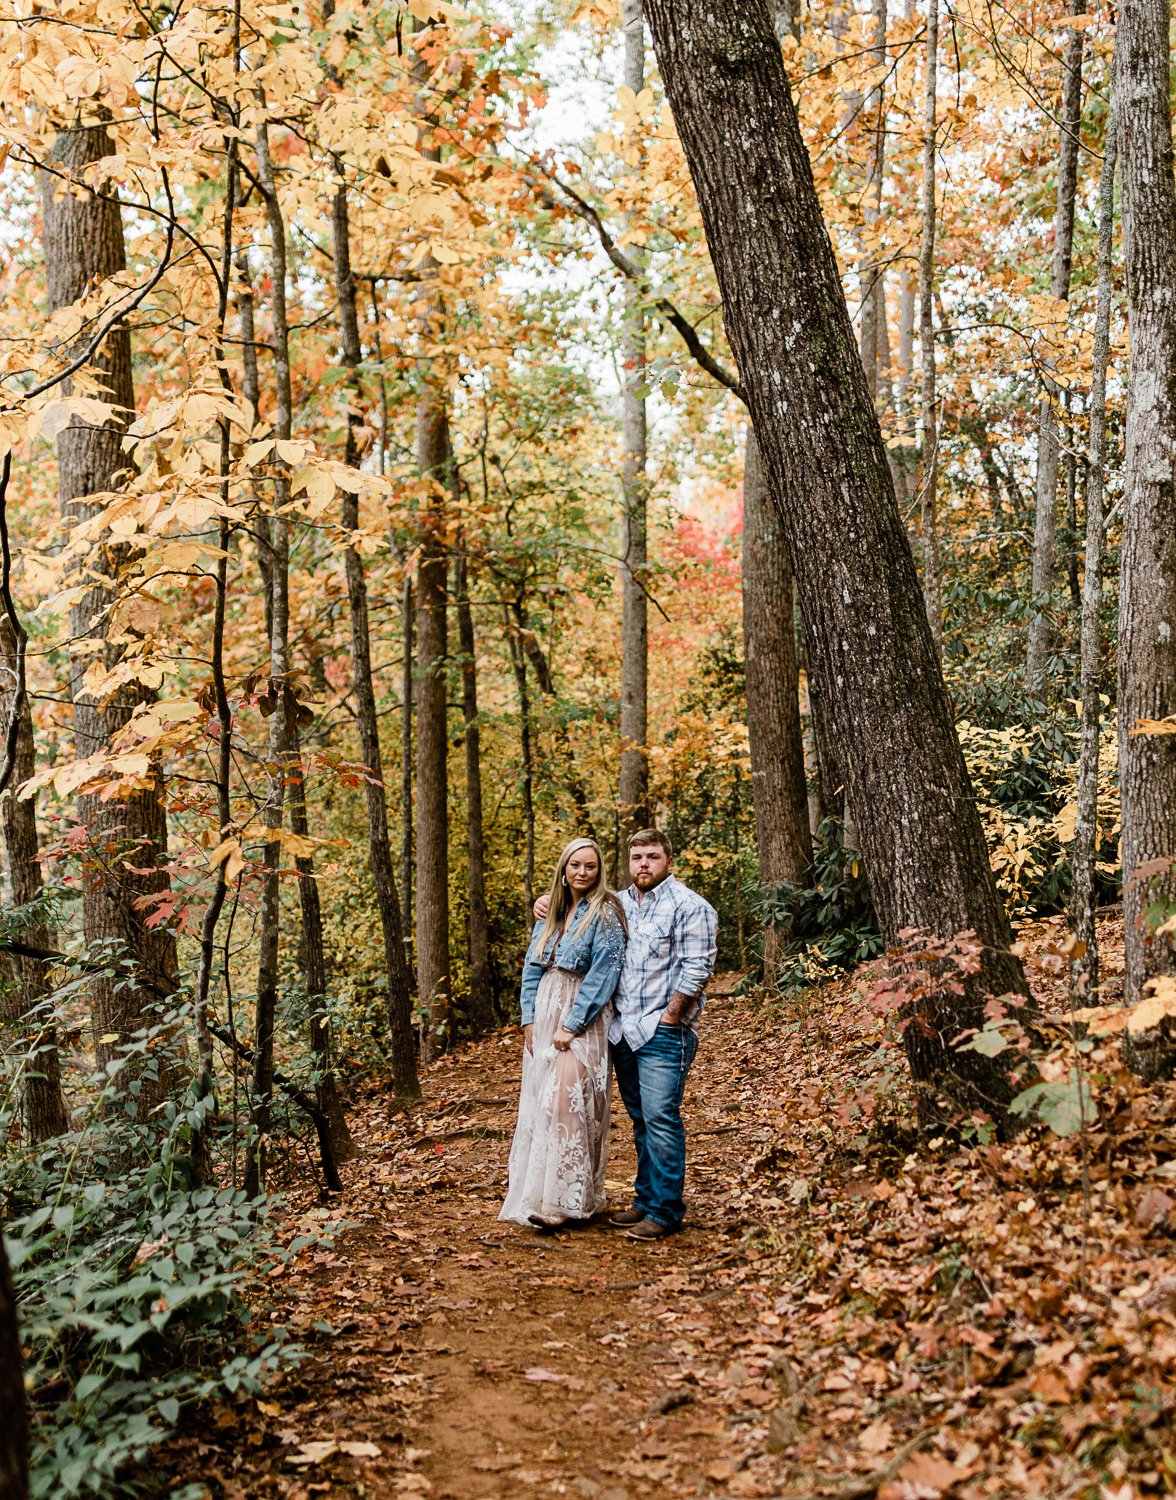 5 of the best places to take engagment photos in greenville sc-11.jpg